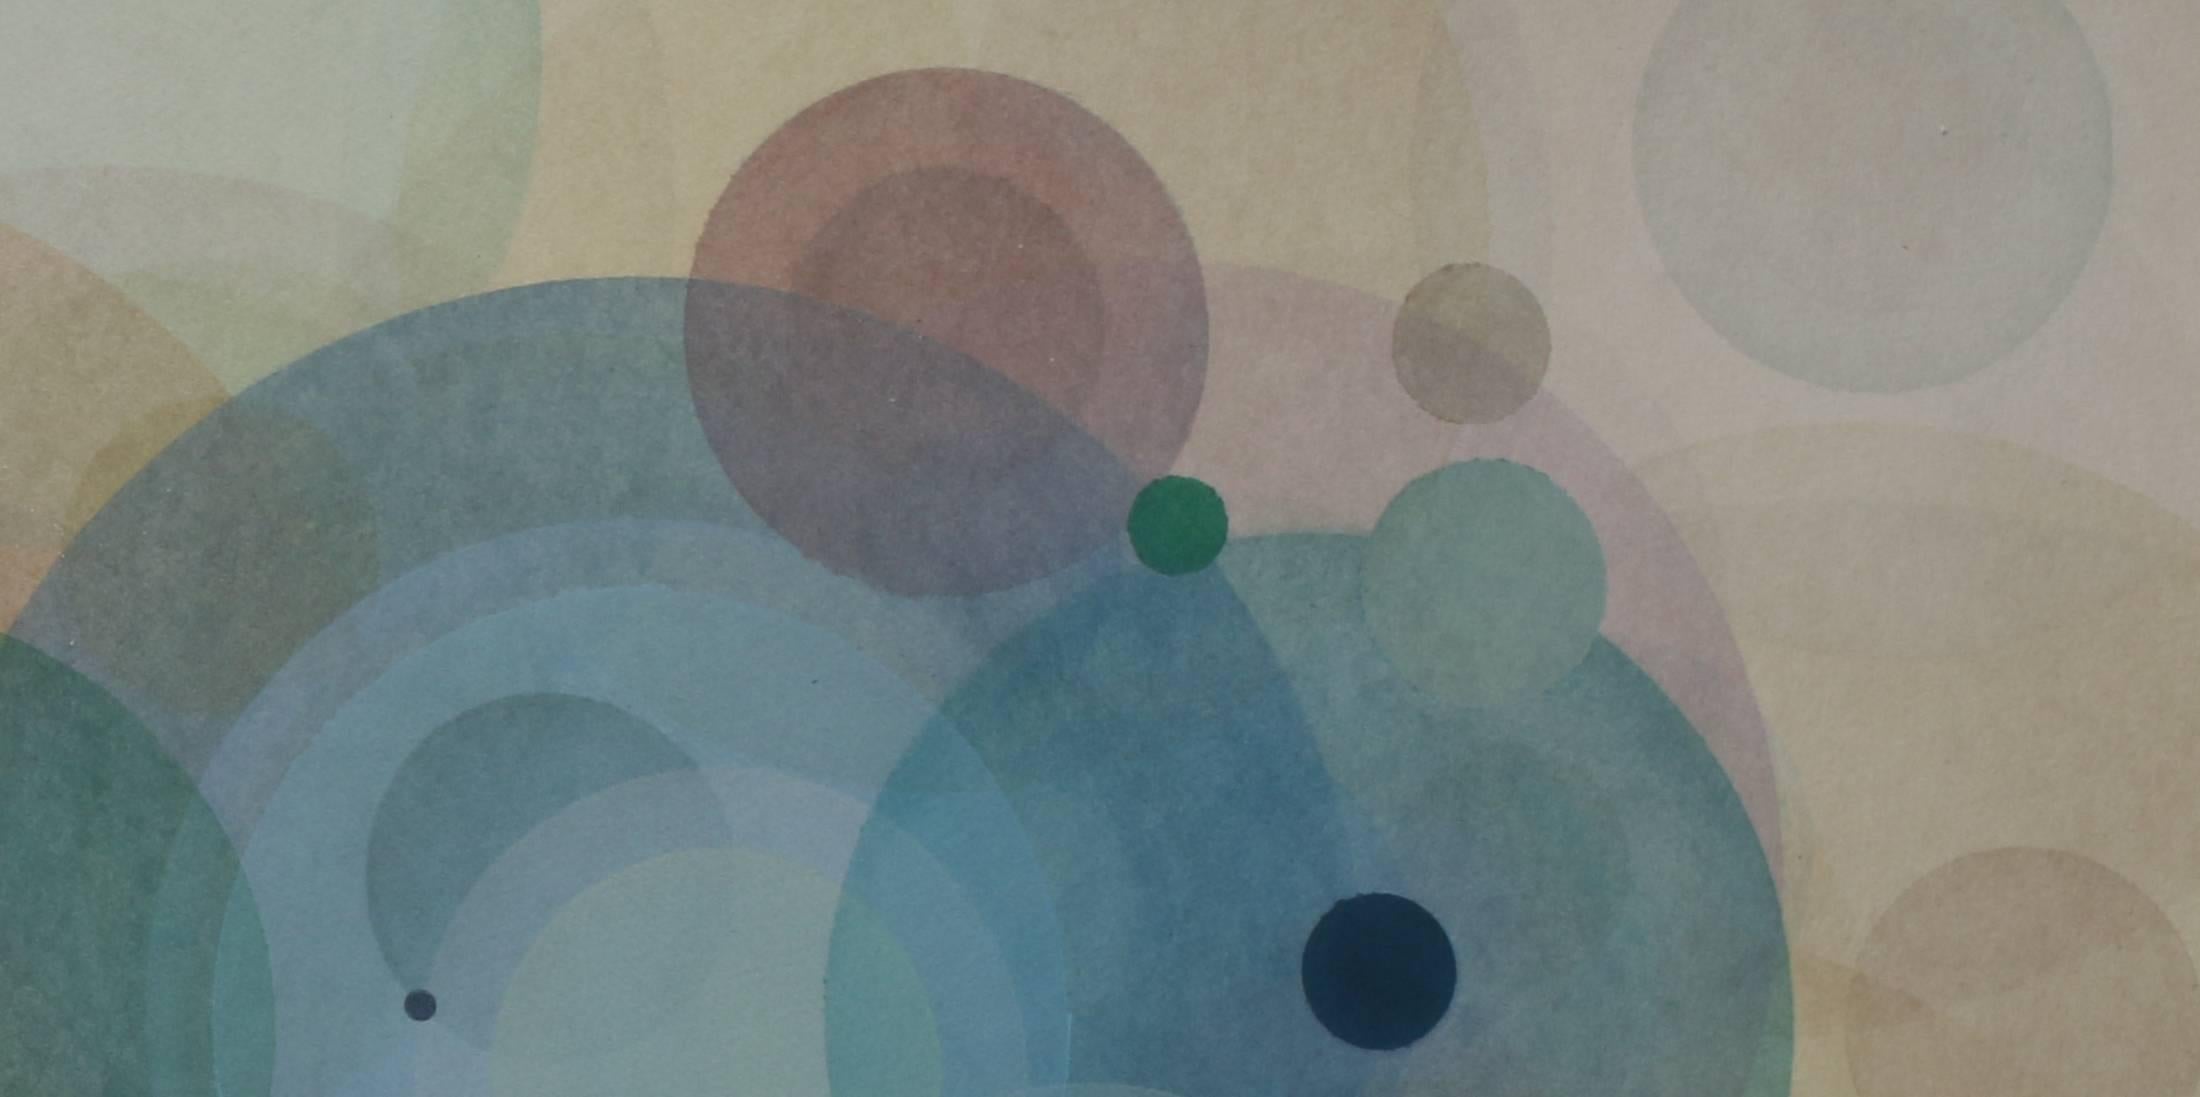 Day Map 718 - Soft pastel color abstract geometric circles watercolor on paper - Art by Evan Venegas